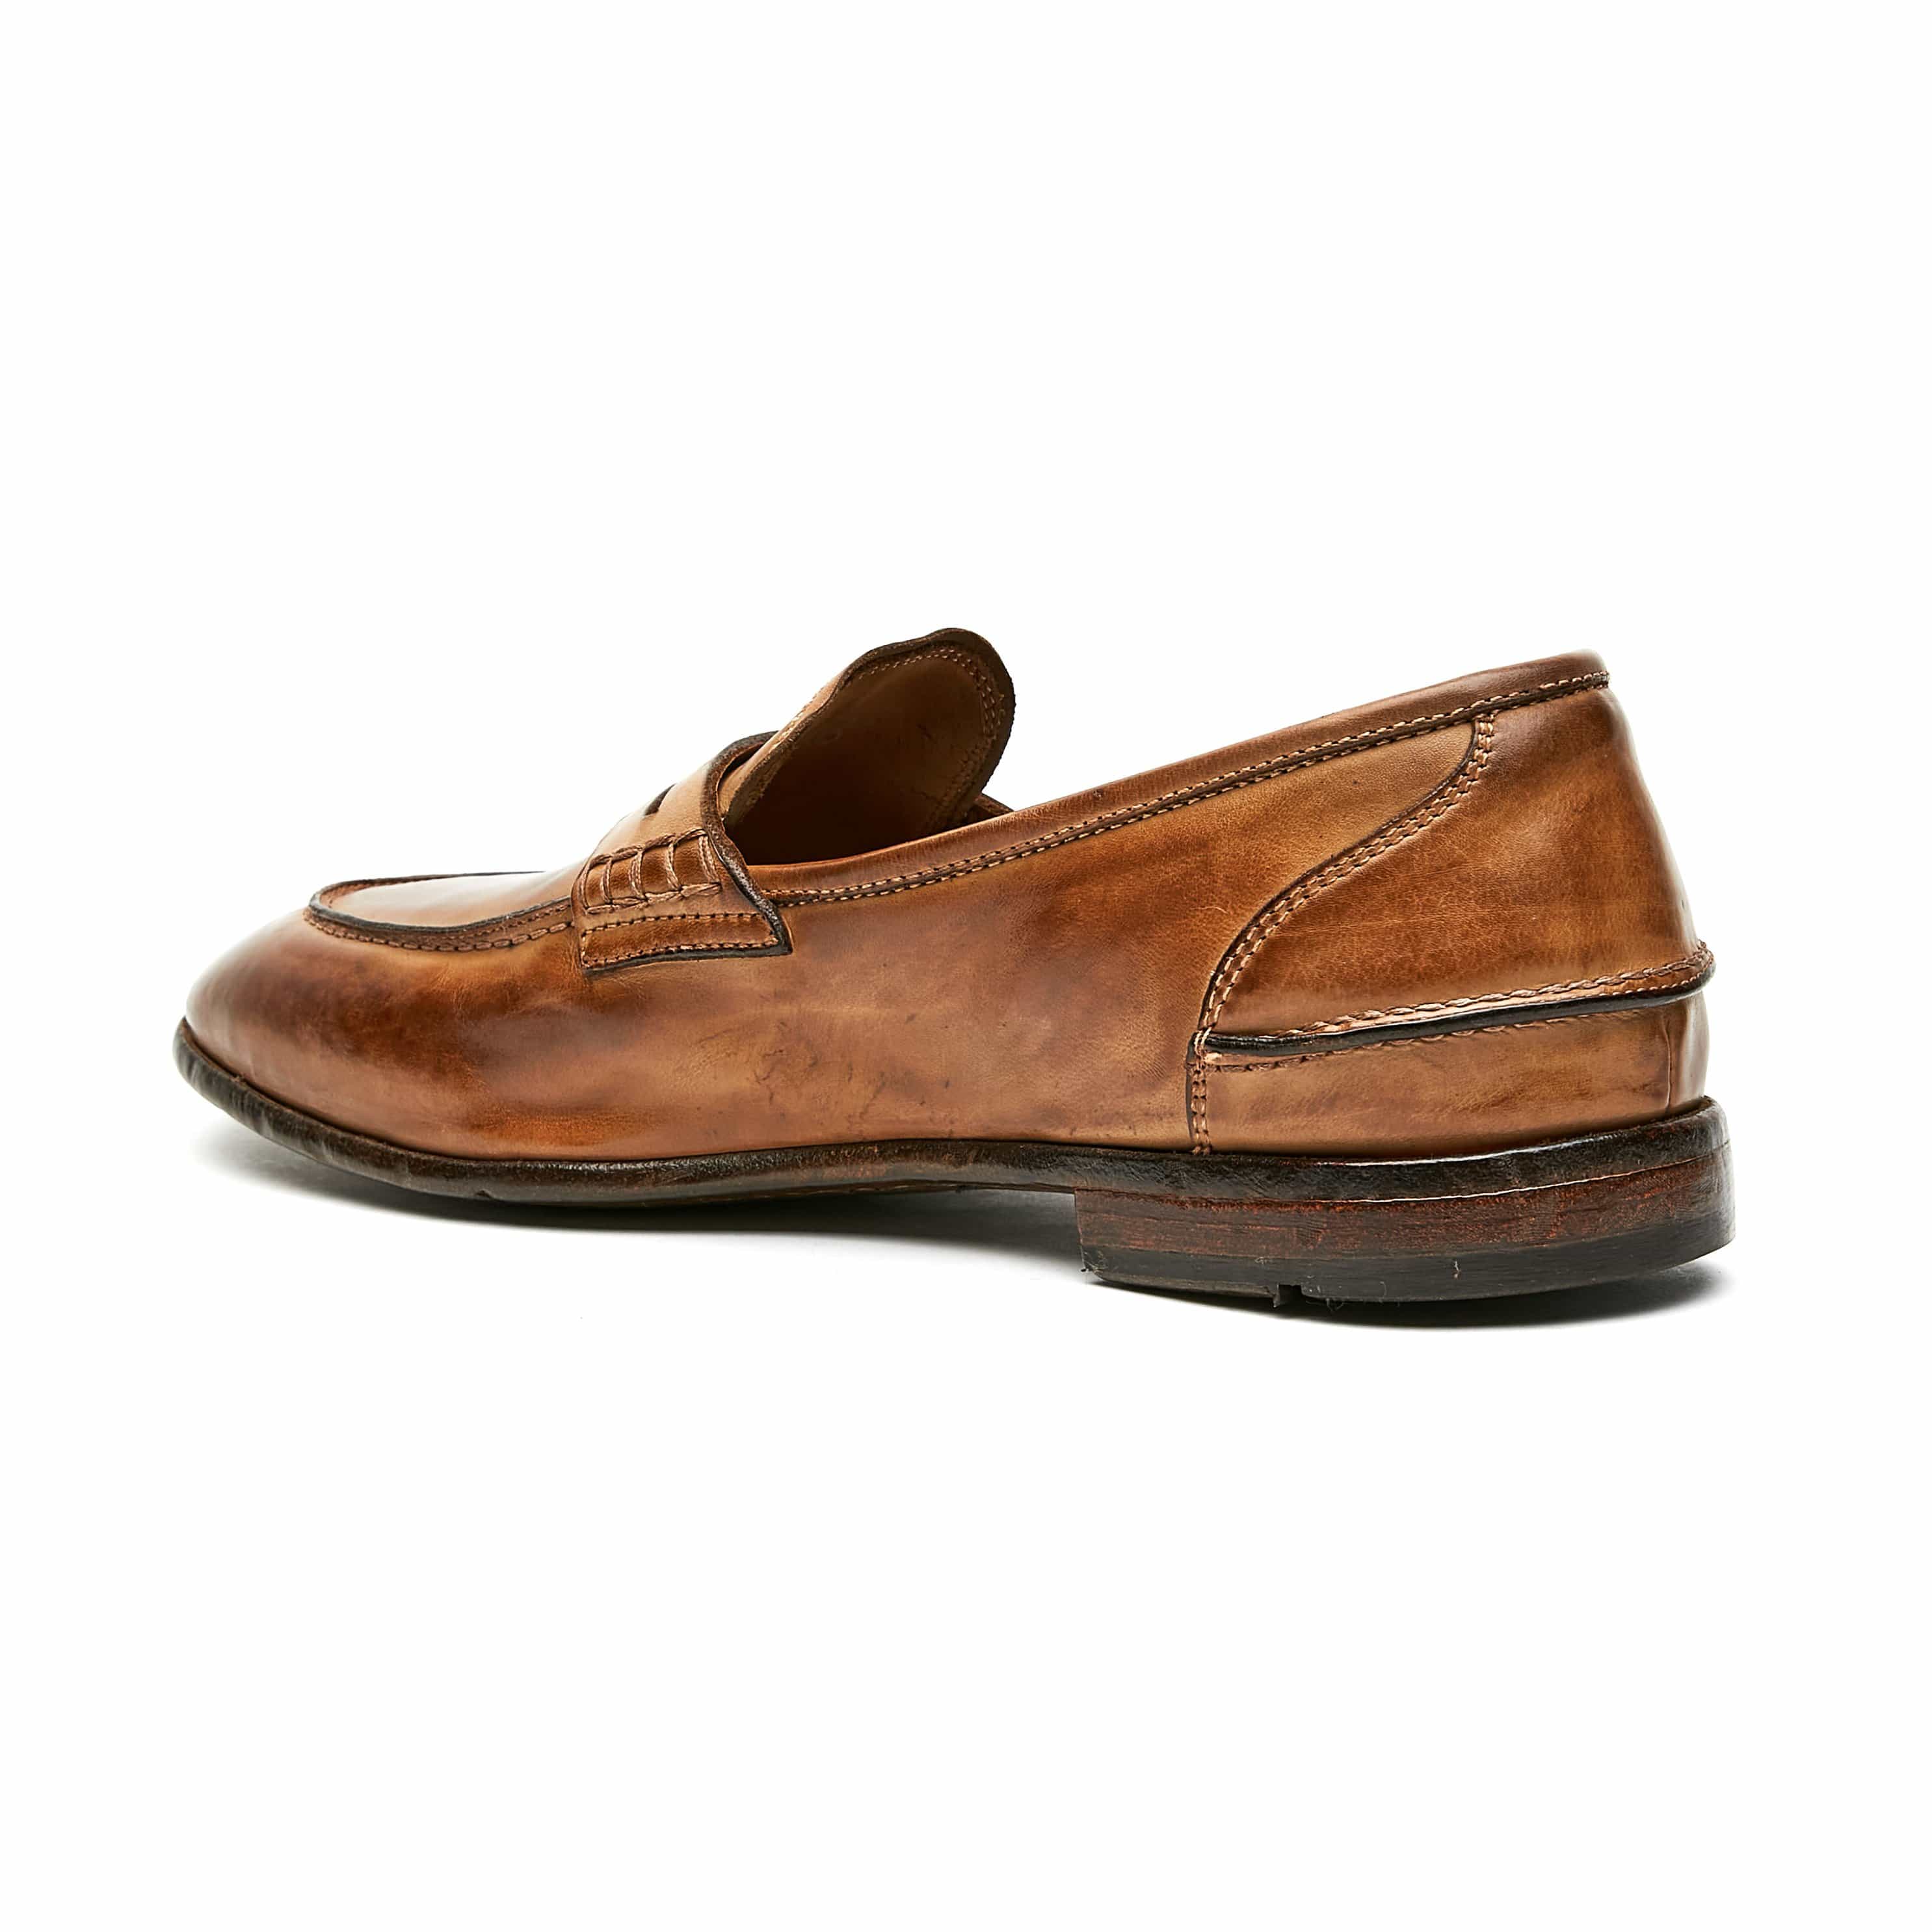 Lemargo DB06A Tan Loafer - 124 Shoes